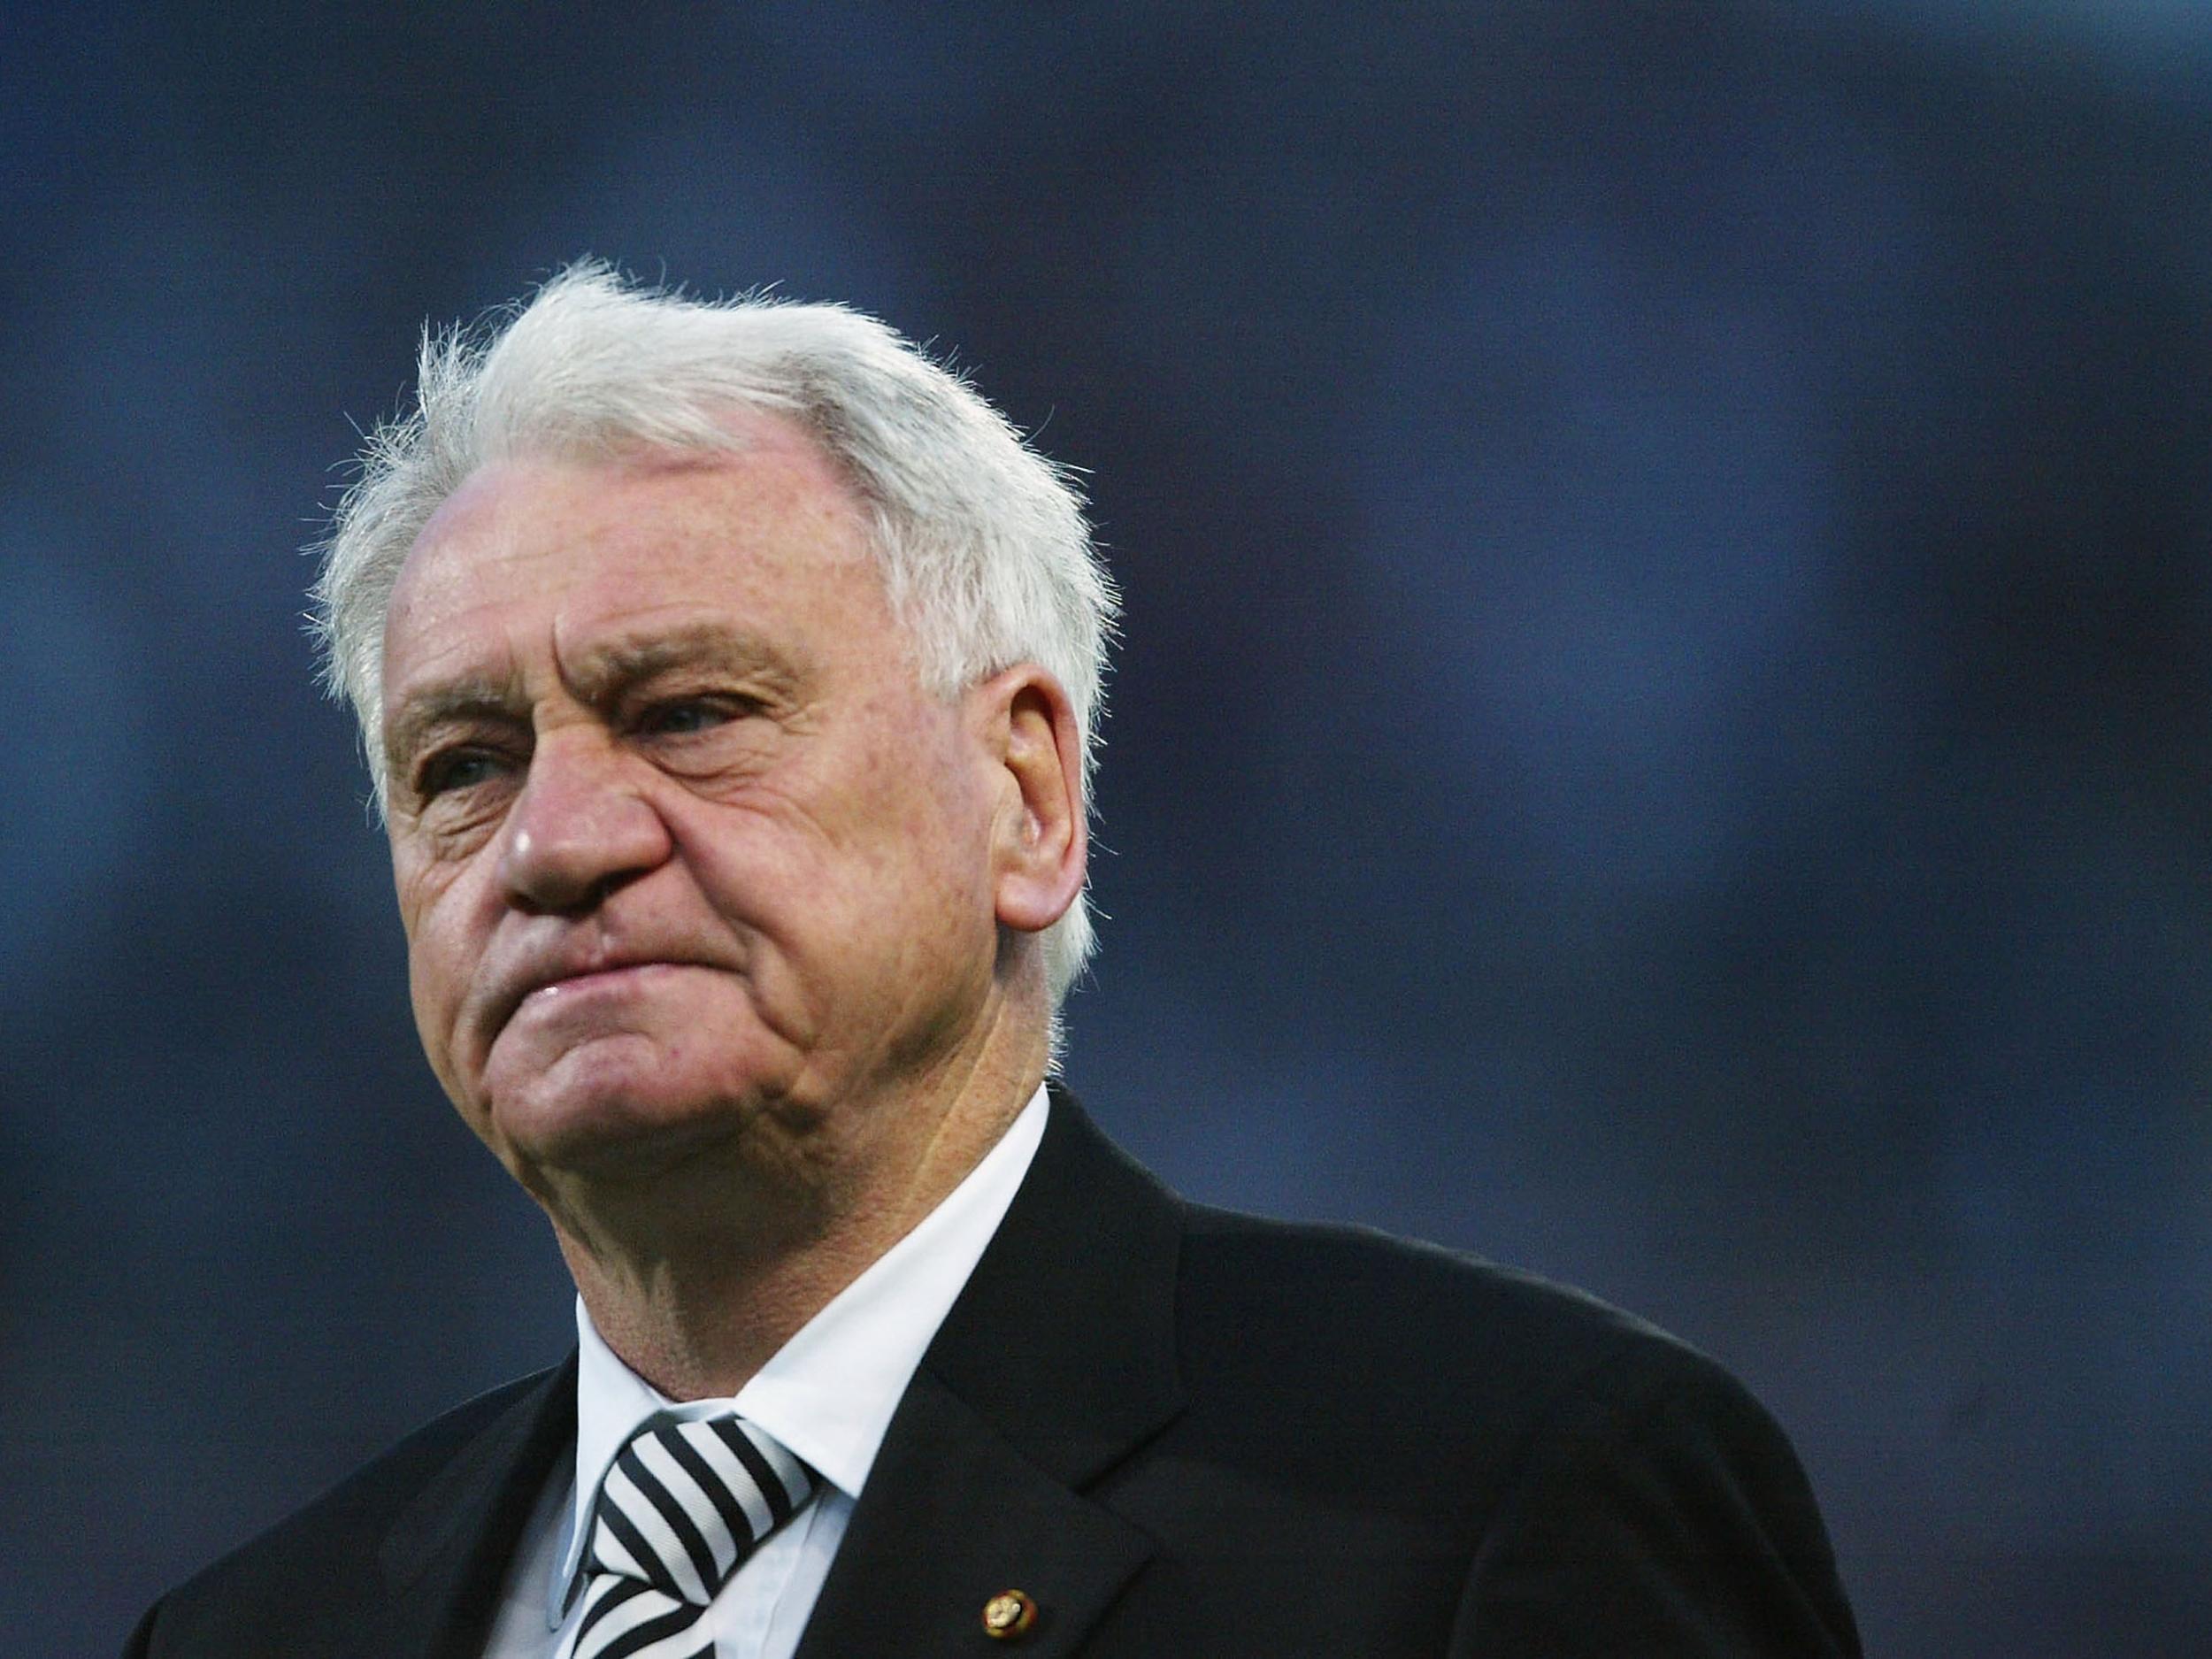 Robson's job at Newcastle was to be his last in football management